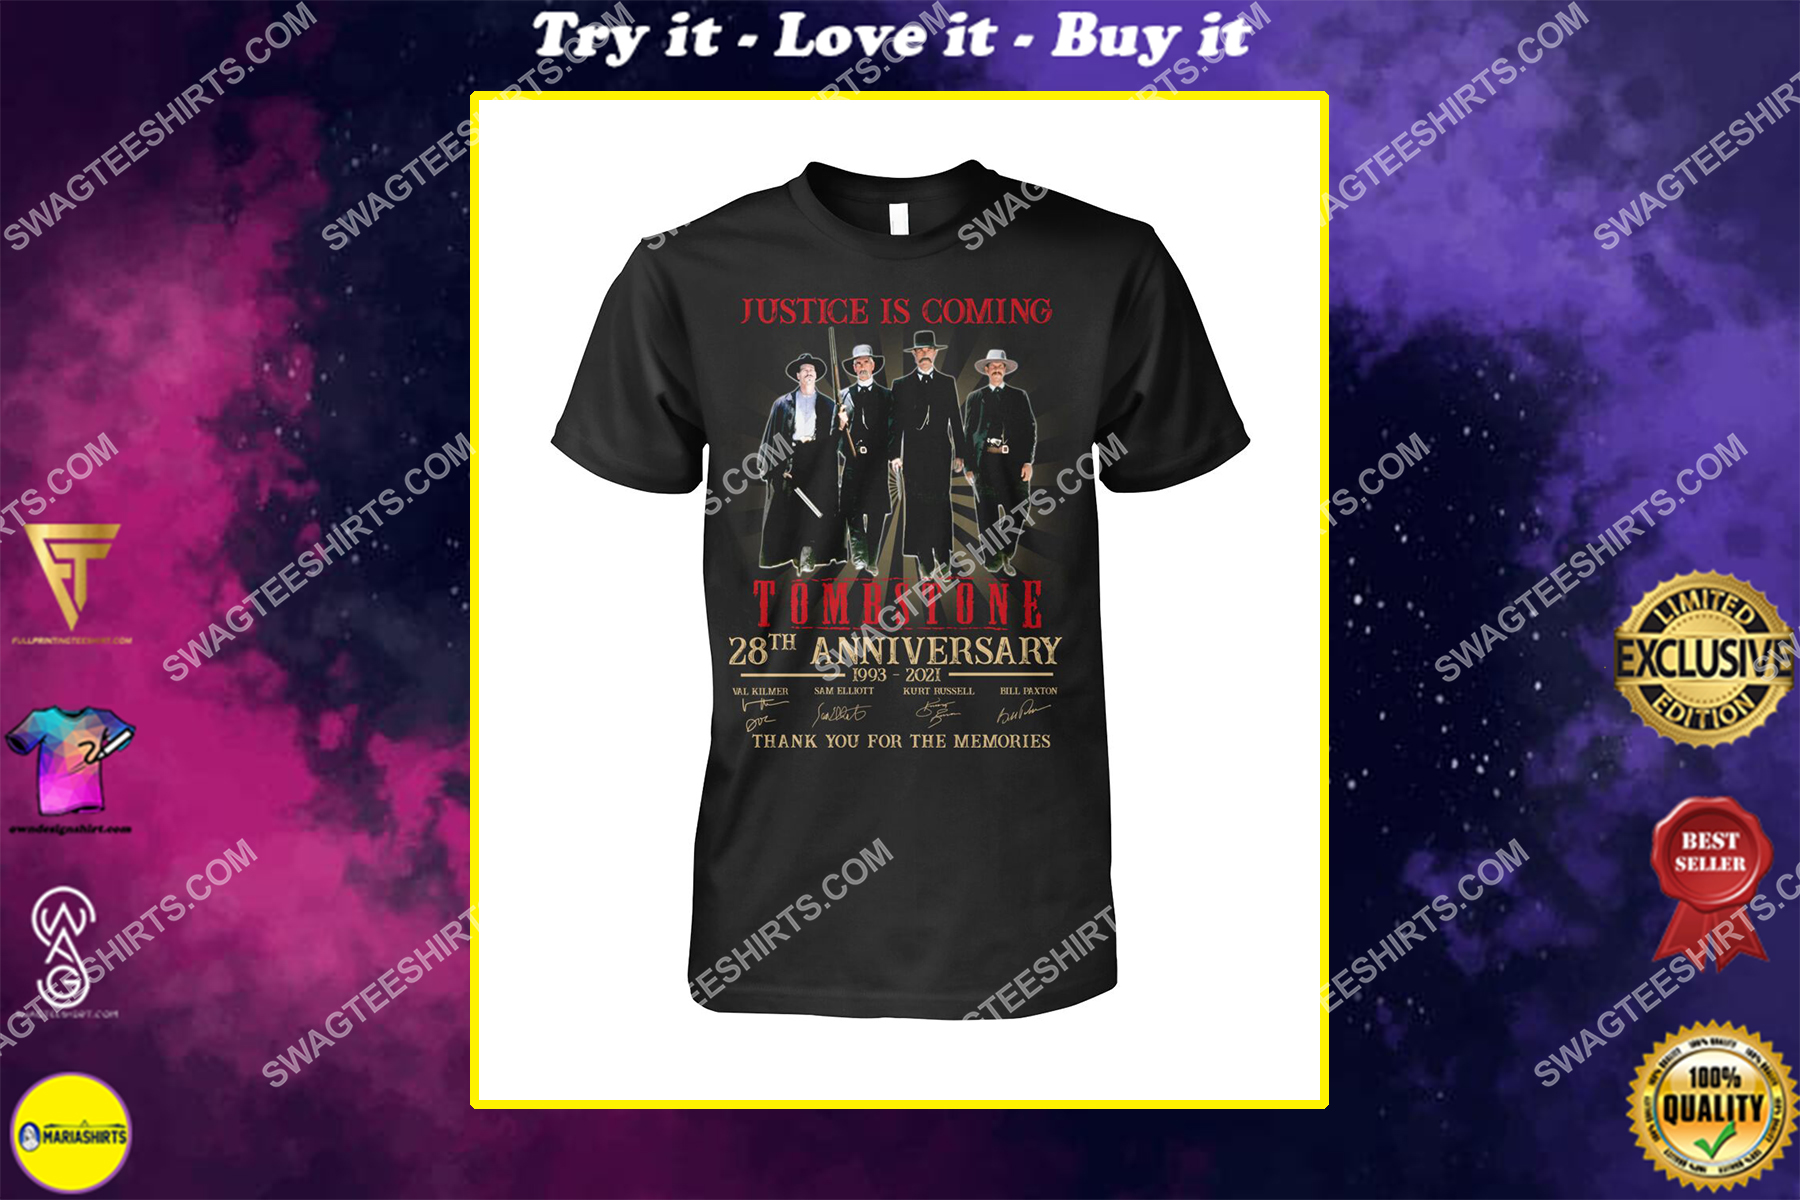 justice is coming tombstone 28th anniversary thank you for the memories shirt